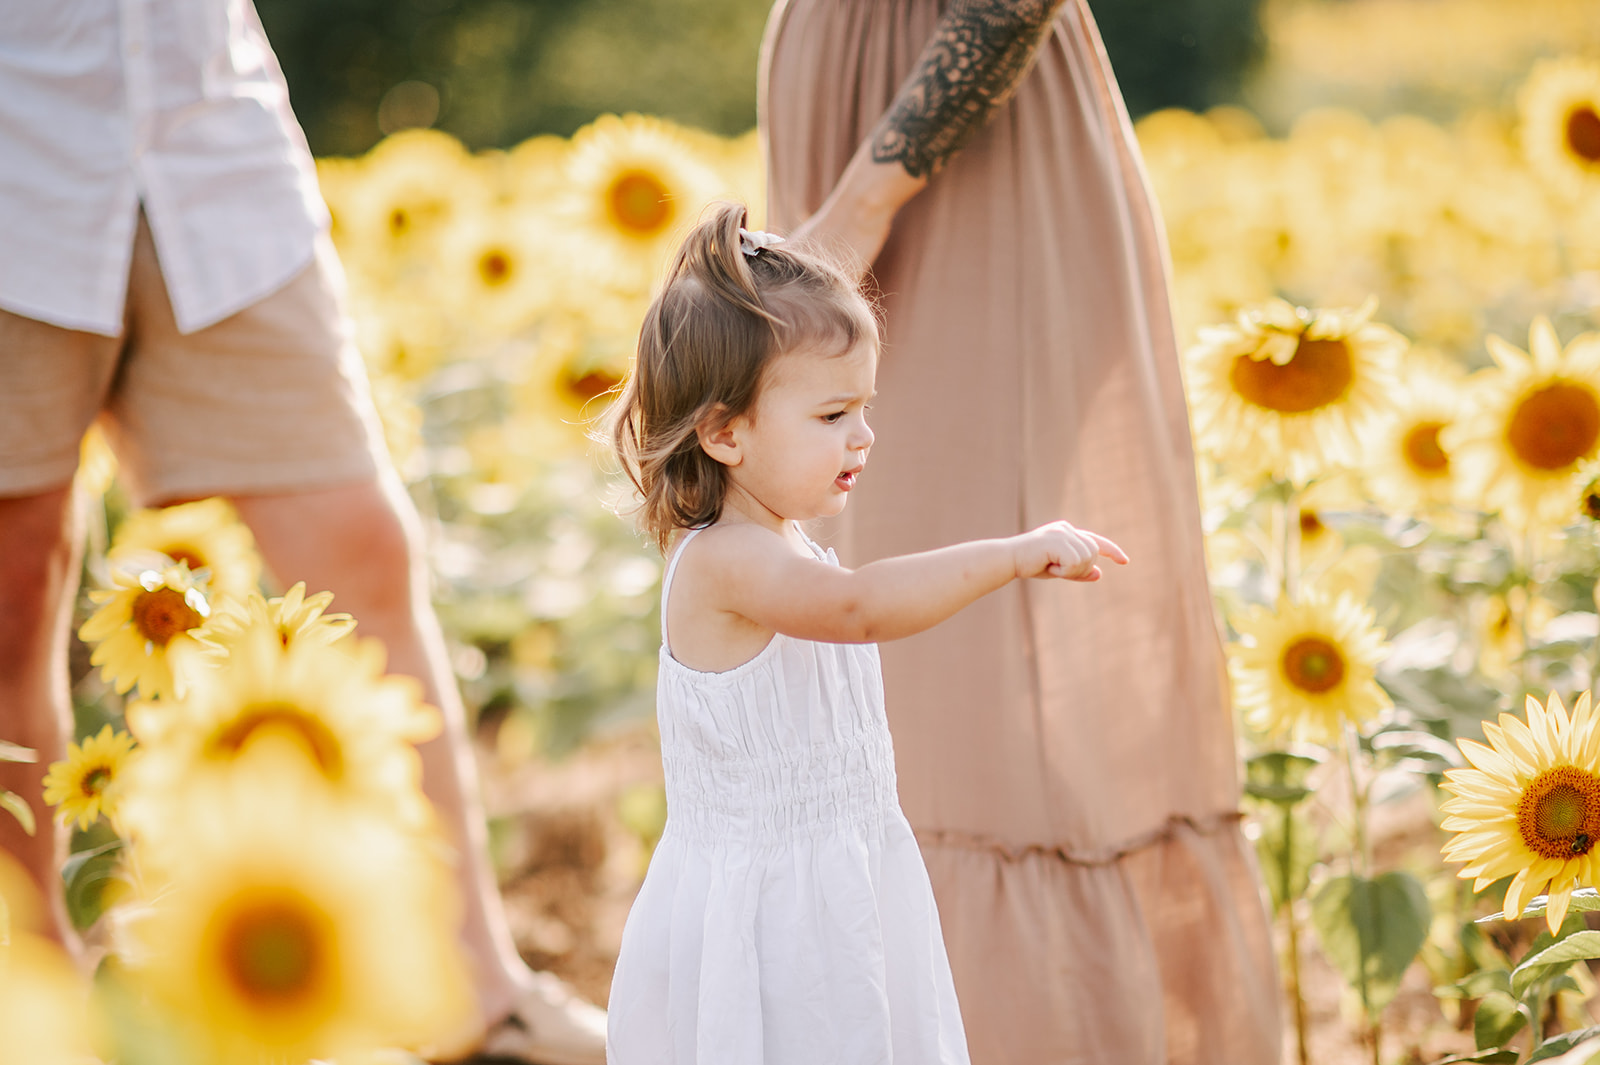 A curious young toddler in a white dress points at a bee on a sunflower while mom and dad walk behind her in a field of sunflowers during Asheville Fall Activities